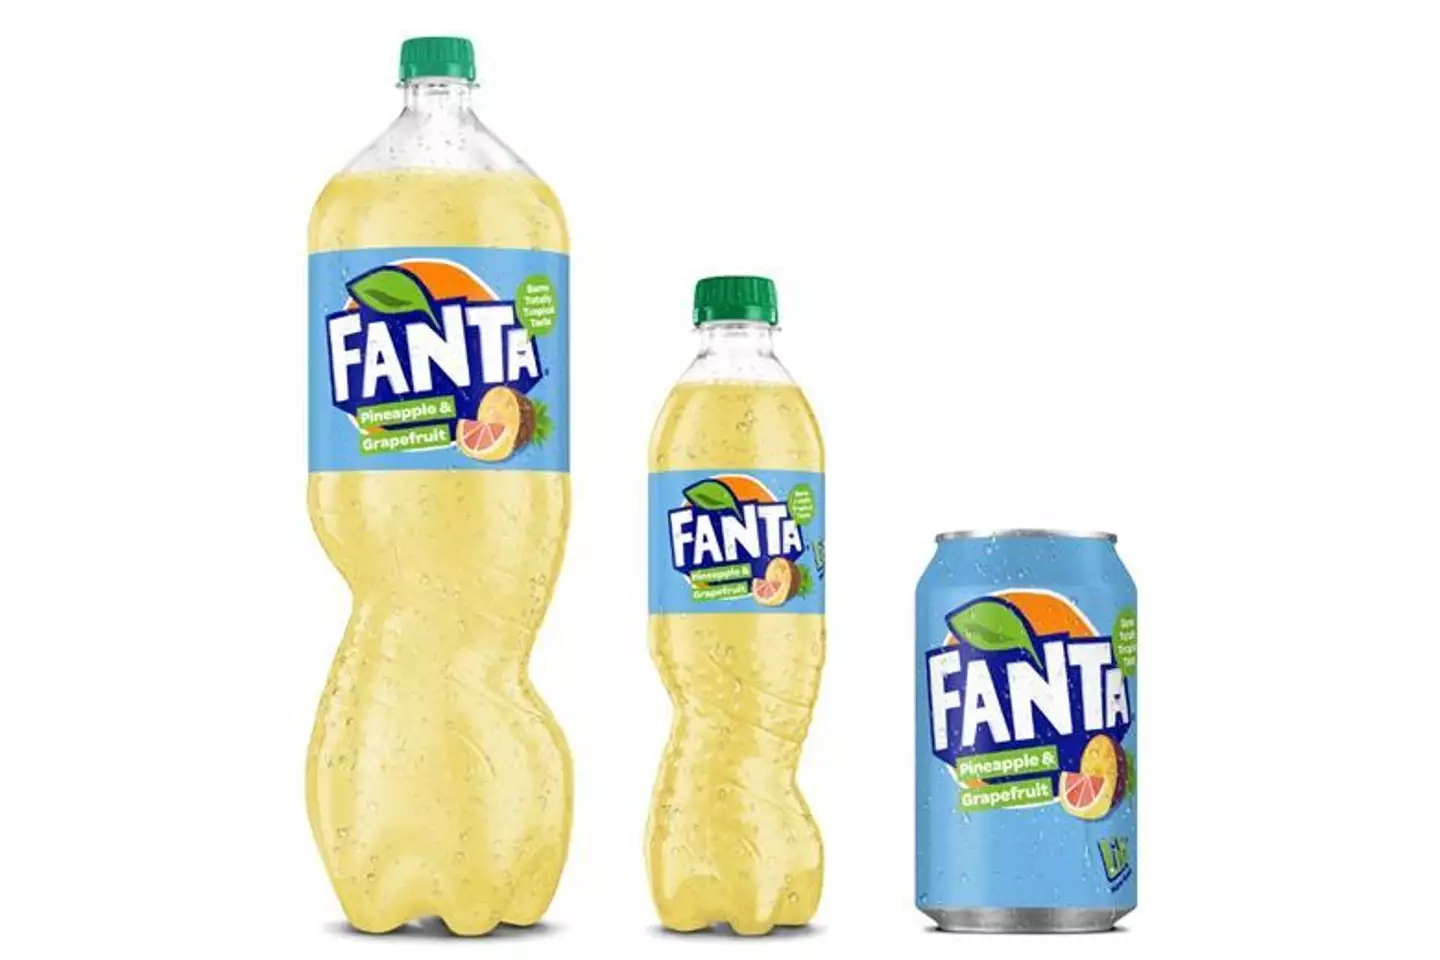 What we once knew as 'Lilt' will now be called 'Fanta Pineapple & Grapefruit'.